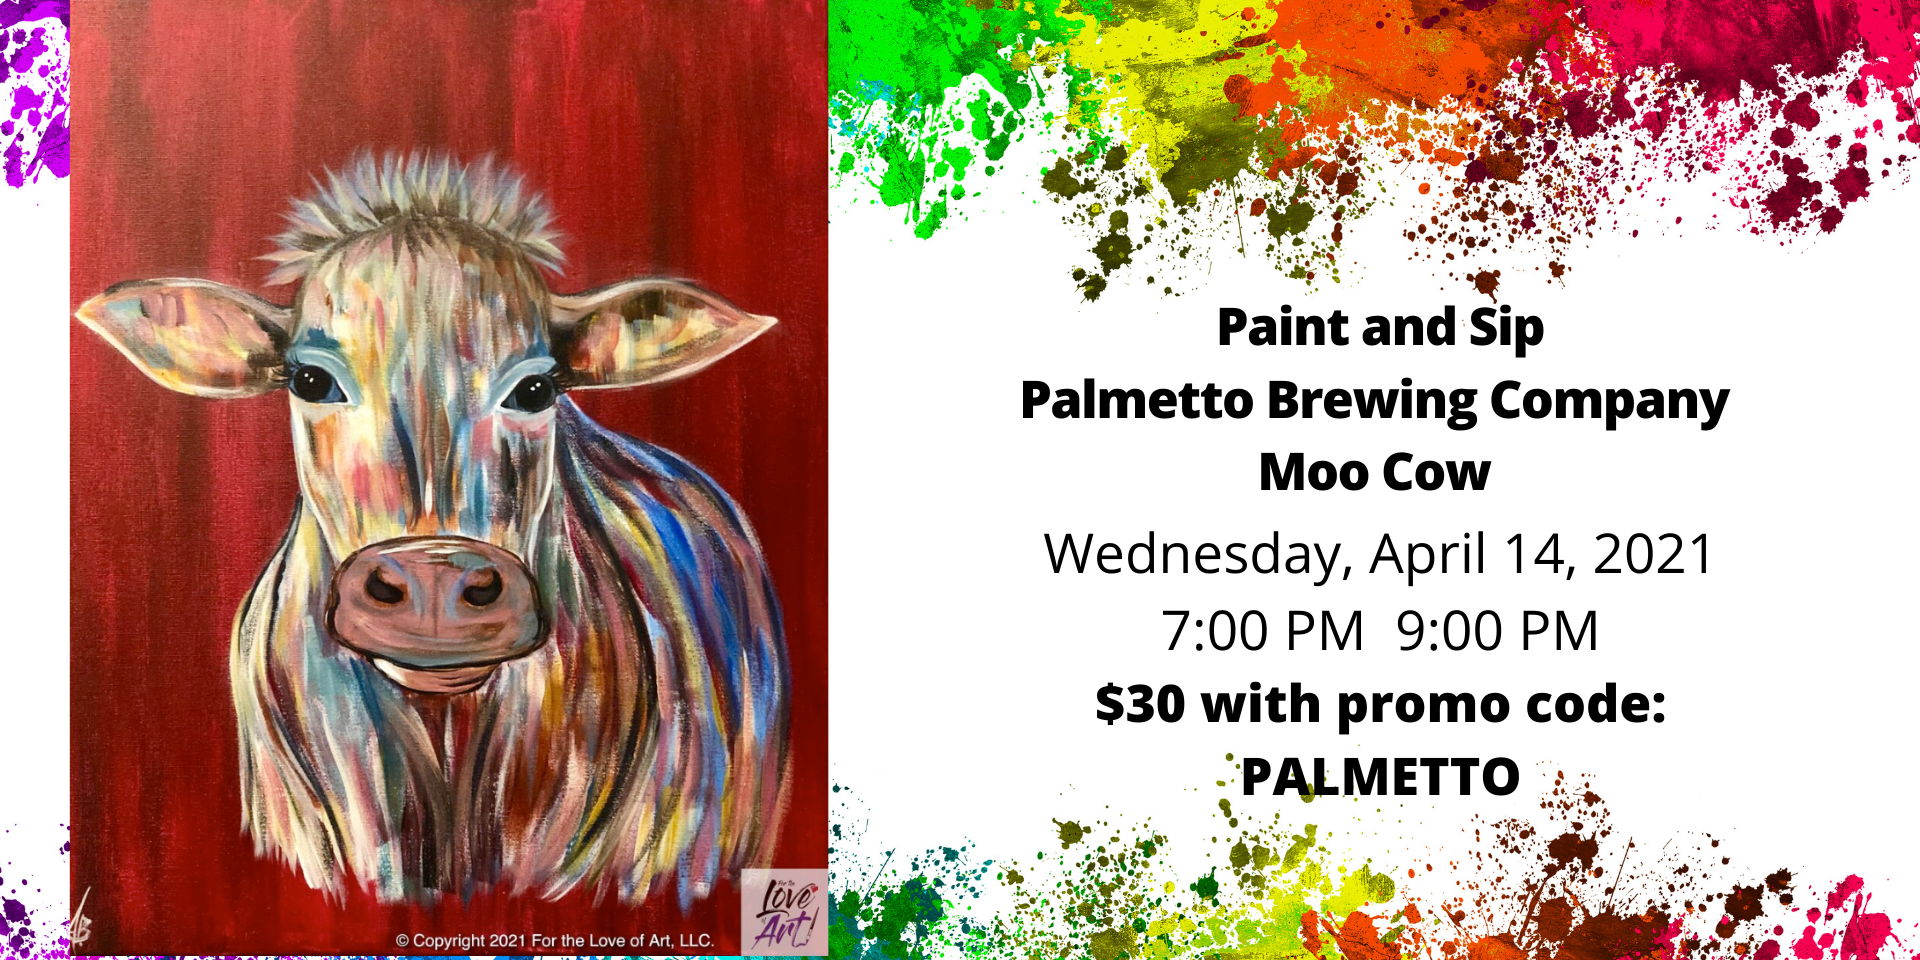 Paint and Sip @ Palmetto Brewing Co: Moo Cow ($30) promotional image